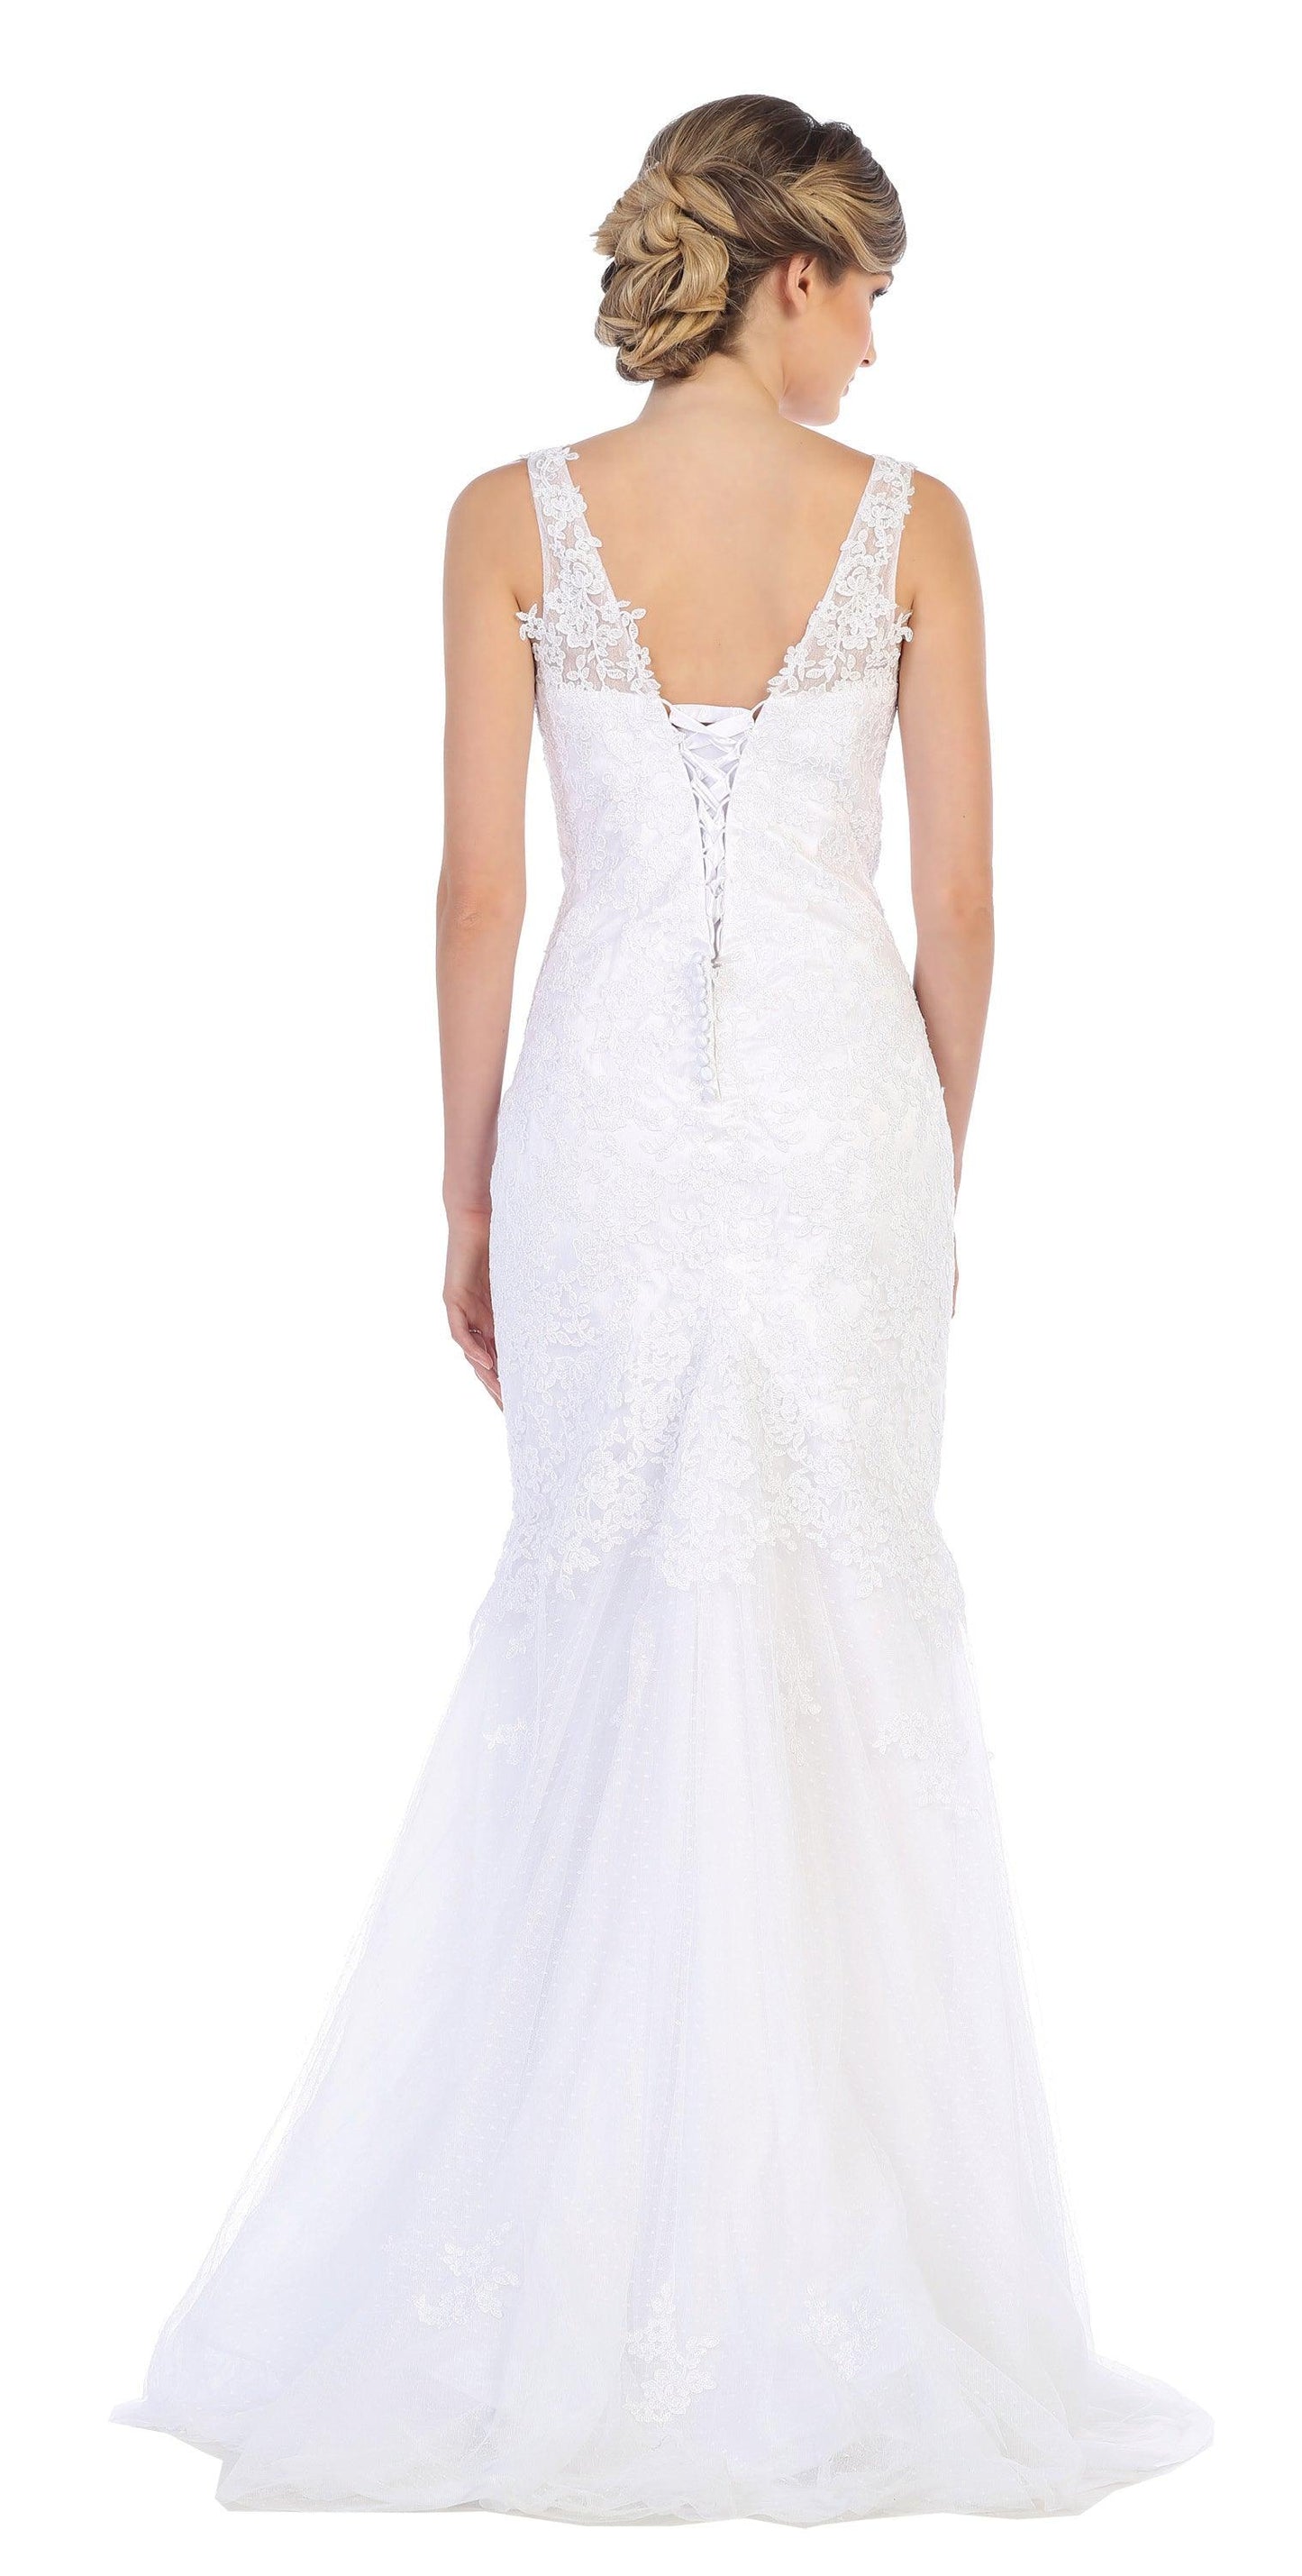 Long Wedding Dress Sleeveless Lace Bridal Gown - The Dress Outlet